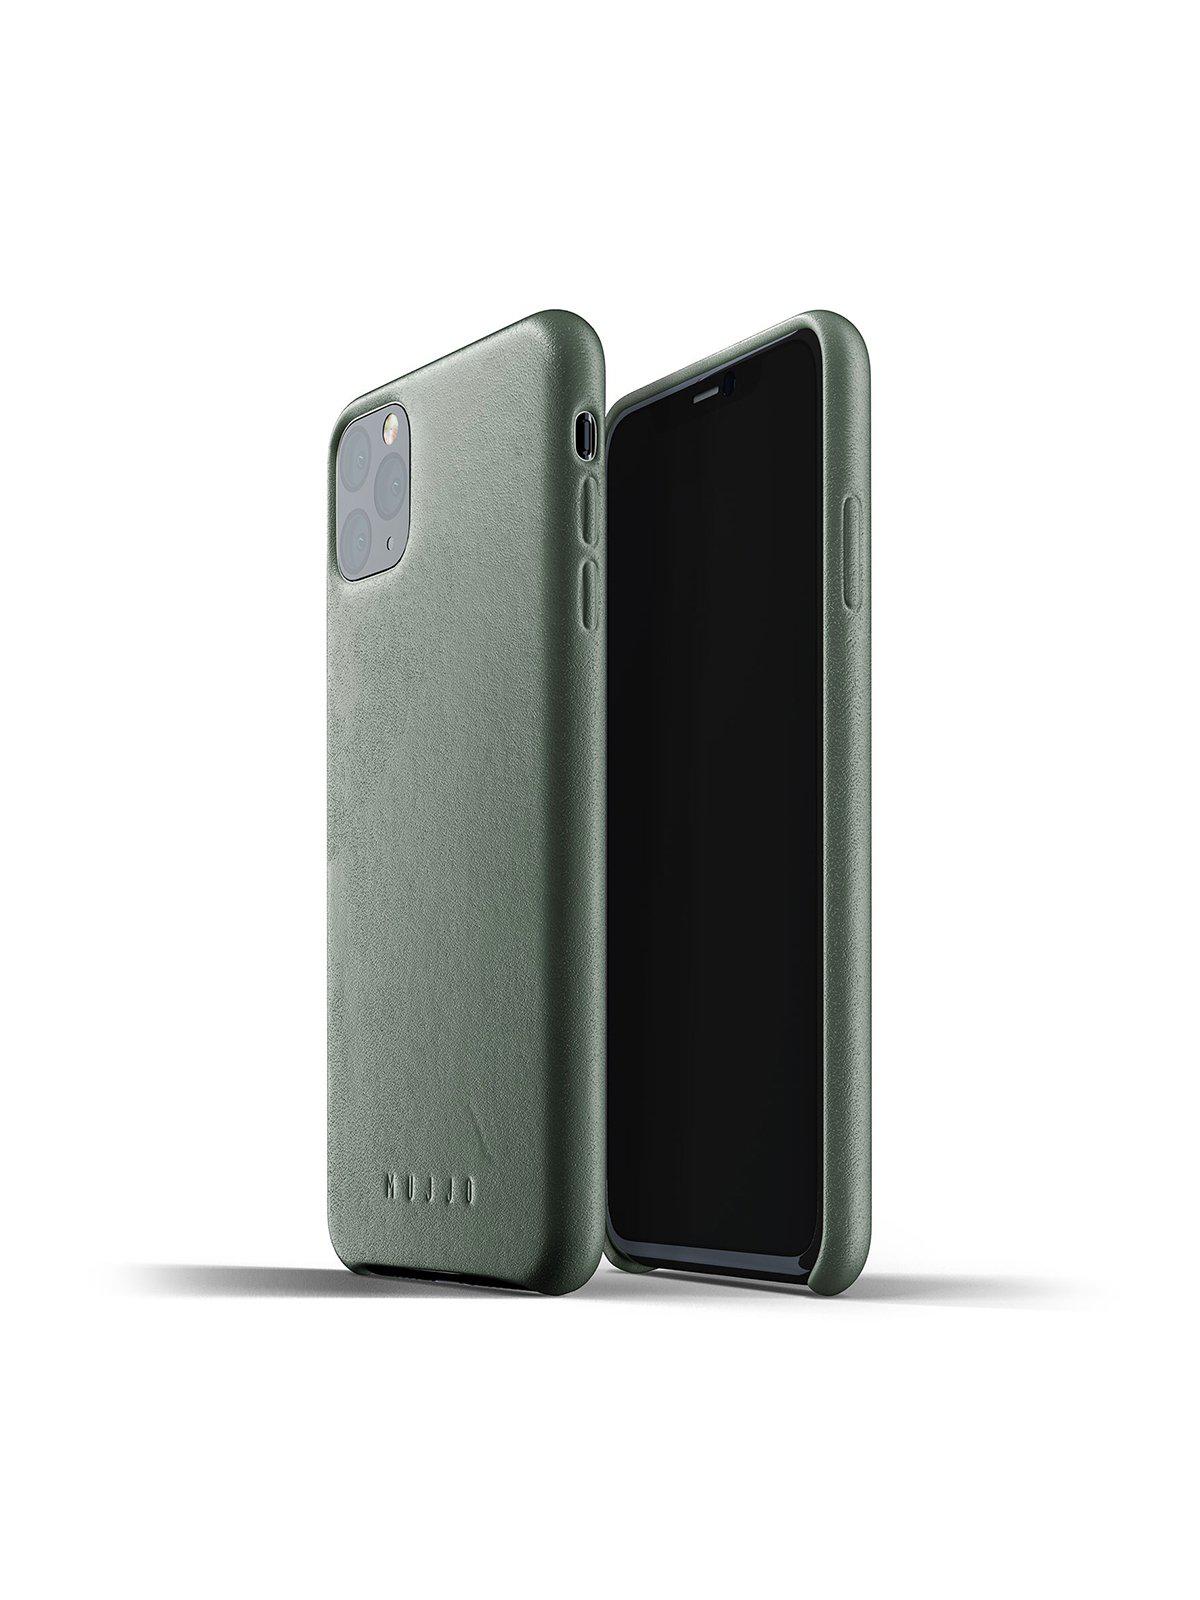 Mujjo Full Leather Case for iPhone 11 Pro Max Slate Green - MORE by Morello Indonesia